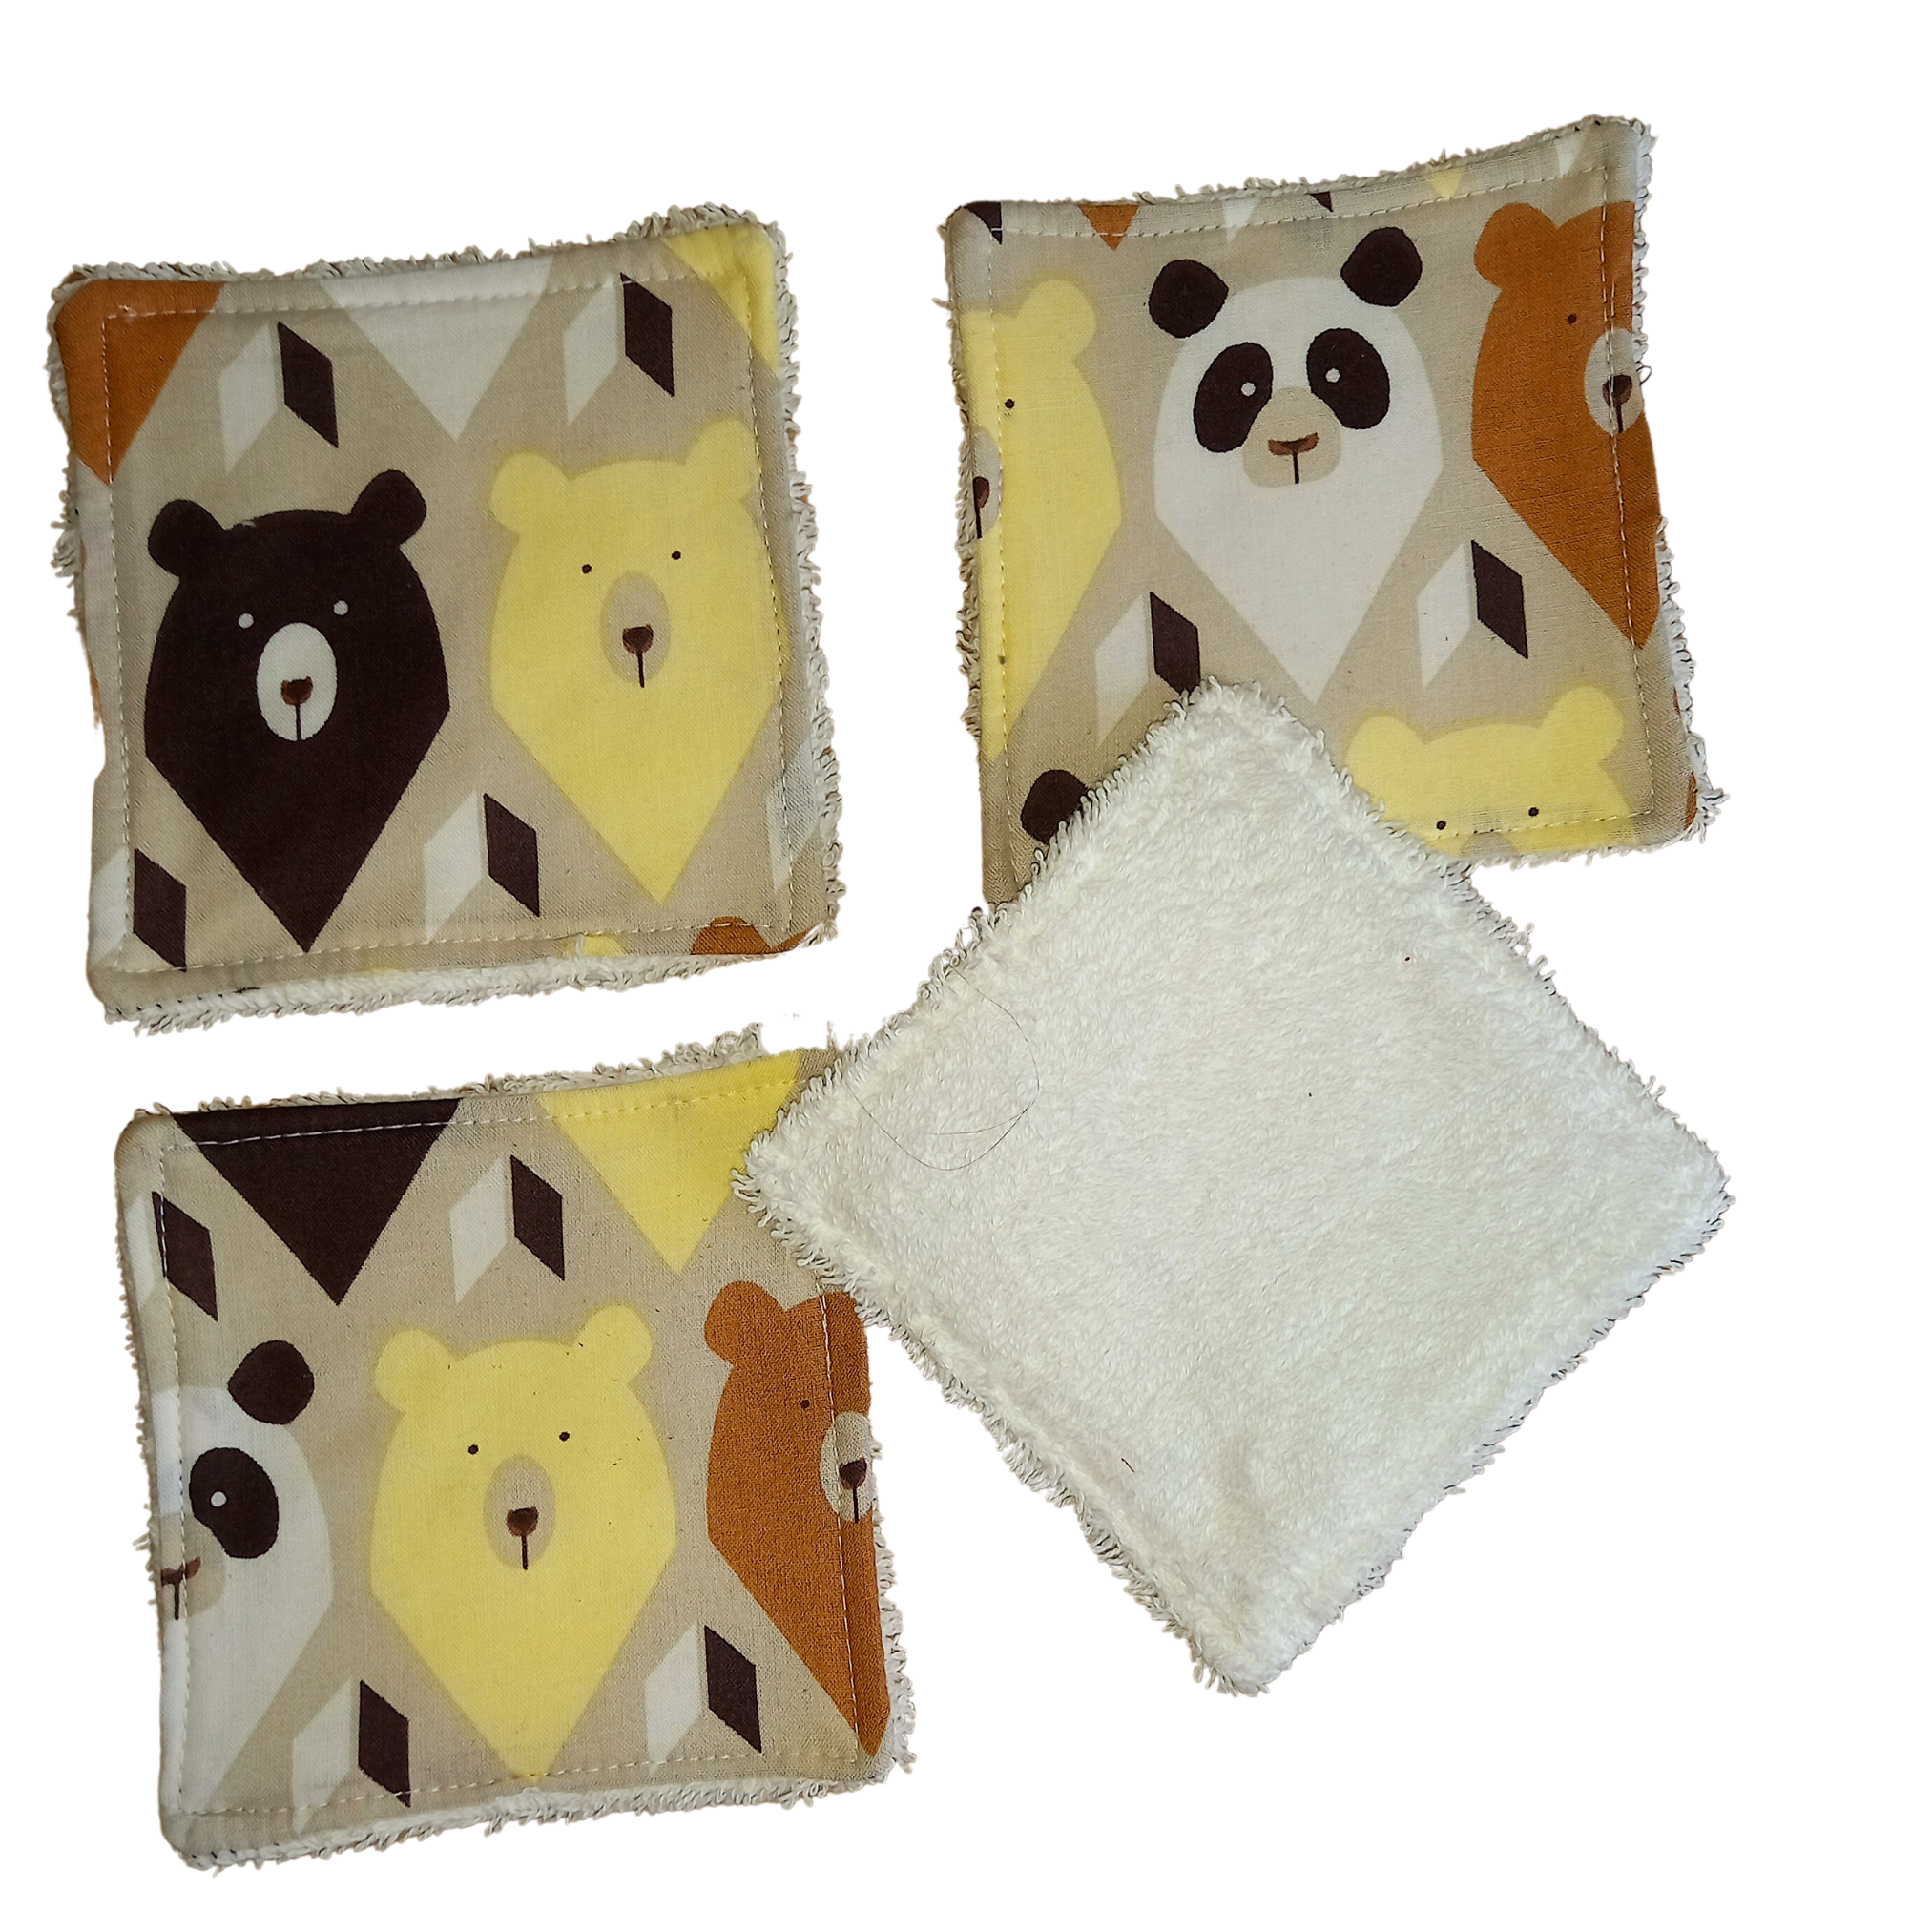 Reusable Cotton Wipes 4 Pack - Make Up - Toddler - Finger Wipes - Bears With Cream Towelling